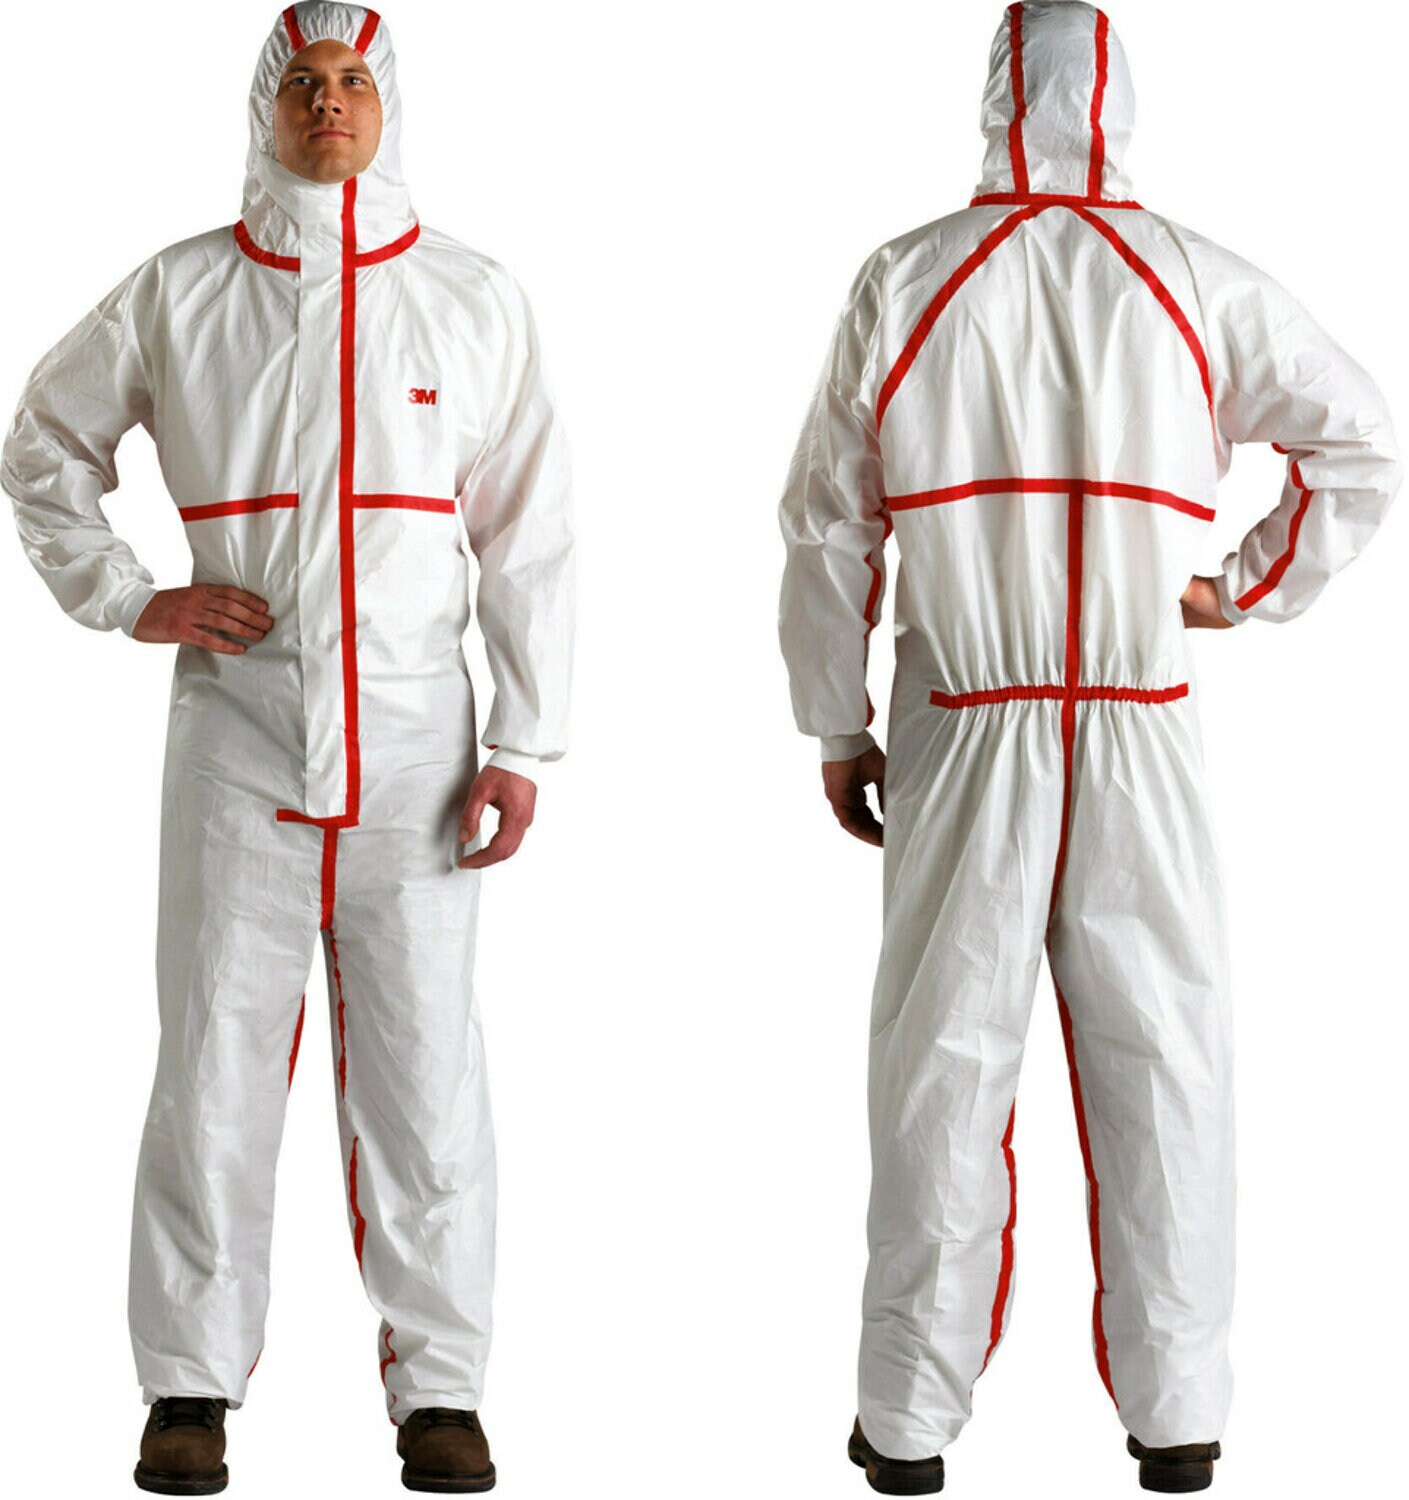 7000109046 - 3M Disposable Chemical Protective Coverall 4565-BLK-M, 25 EA/Case